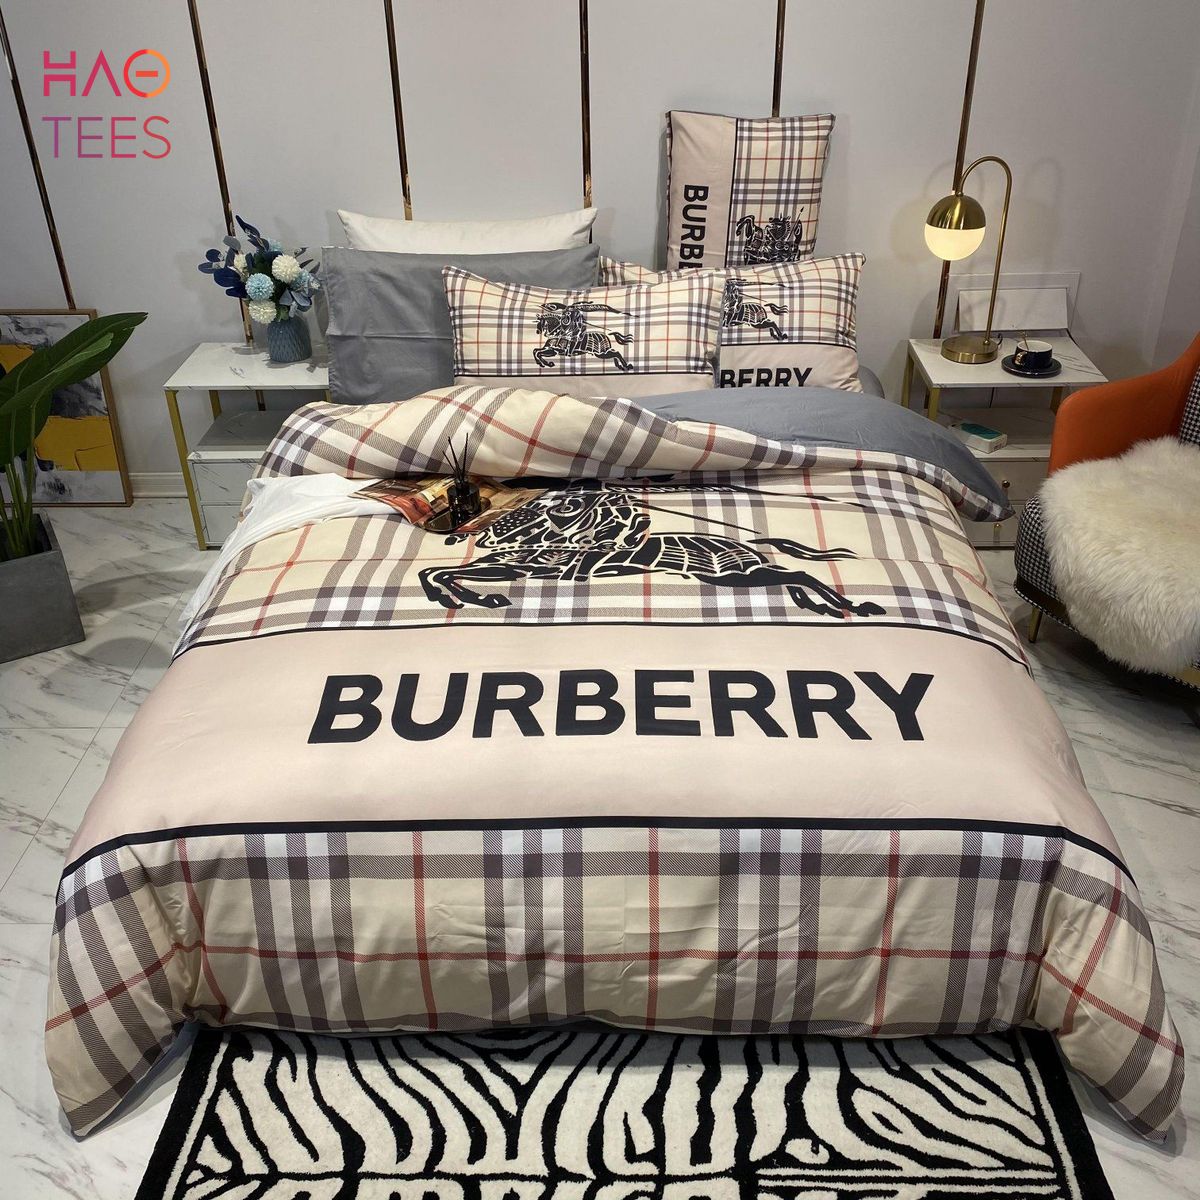 NEW Burberry London Luxury Brand Bedding Sets And Bedroom Sets